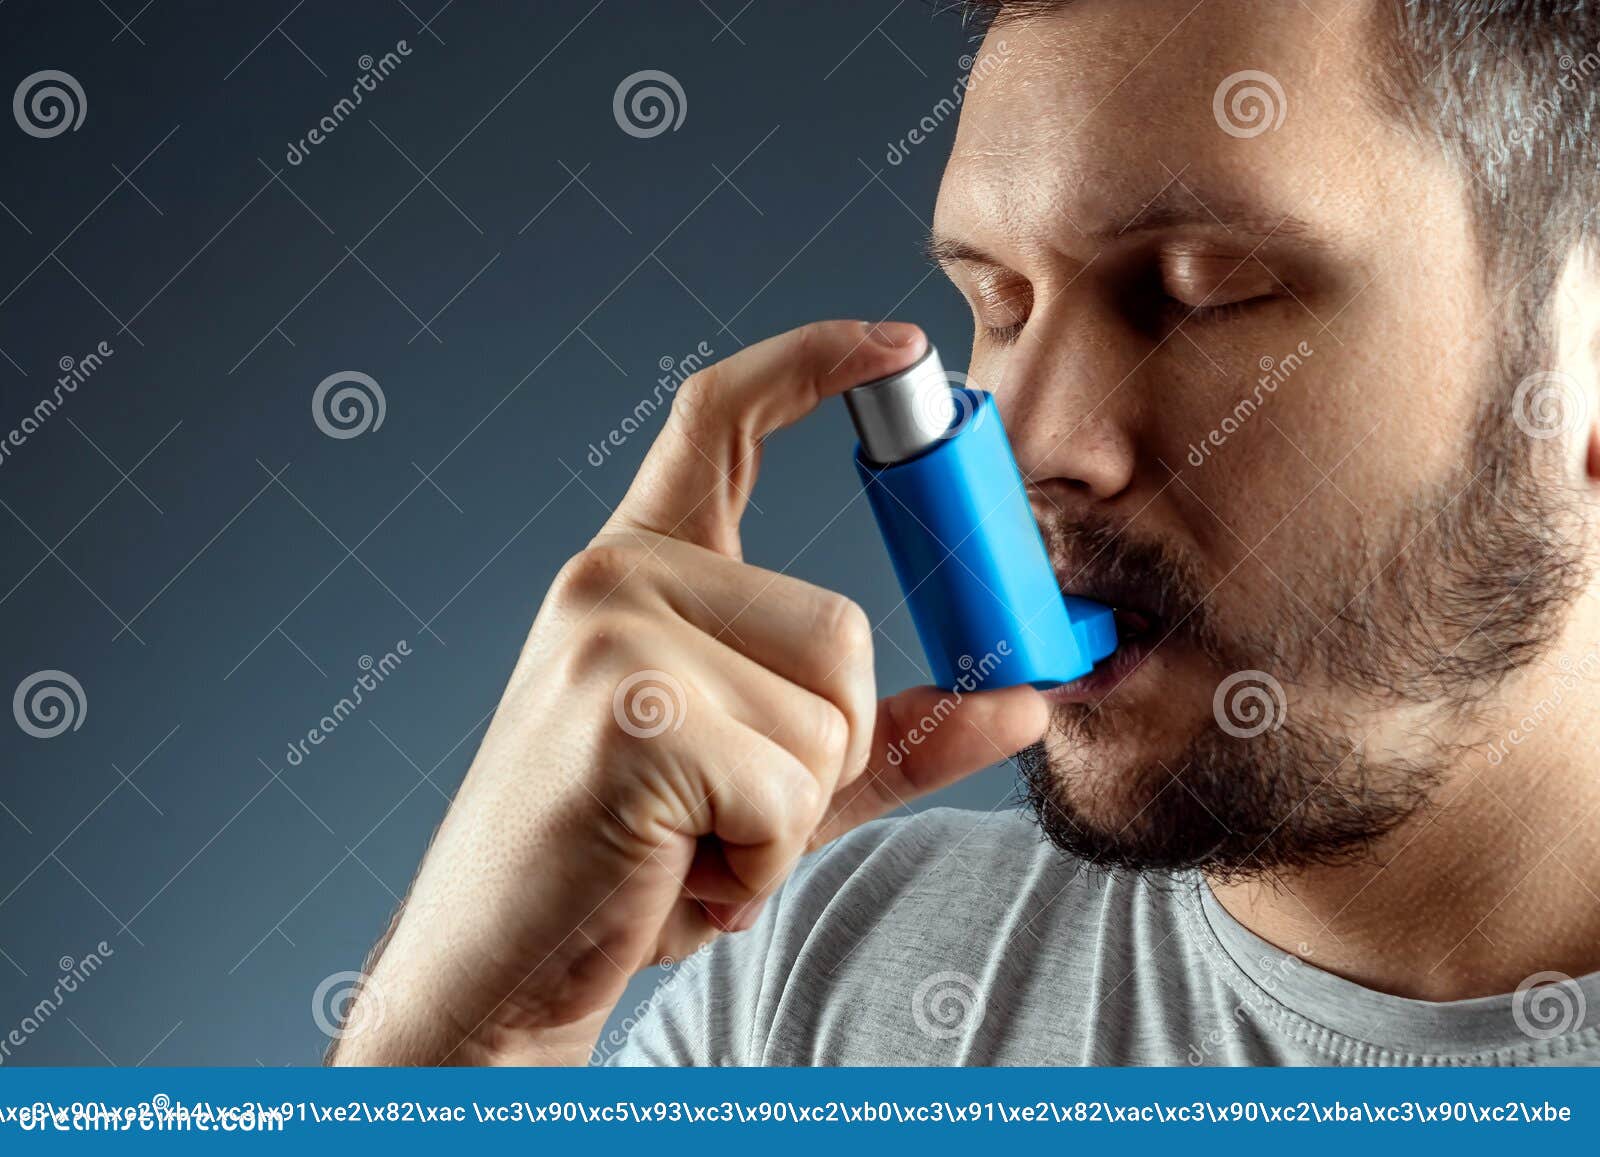 portrait of a man with an asthma inhaler in his hands, an asthmatic attack. the concept of treatment of bronchial asthma, cough,